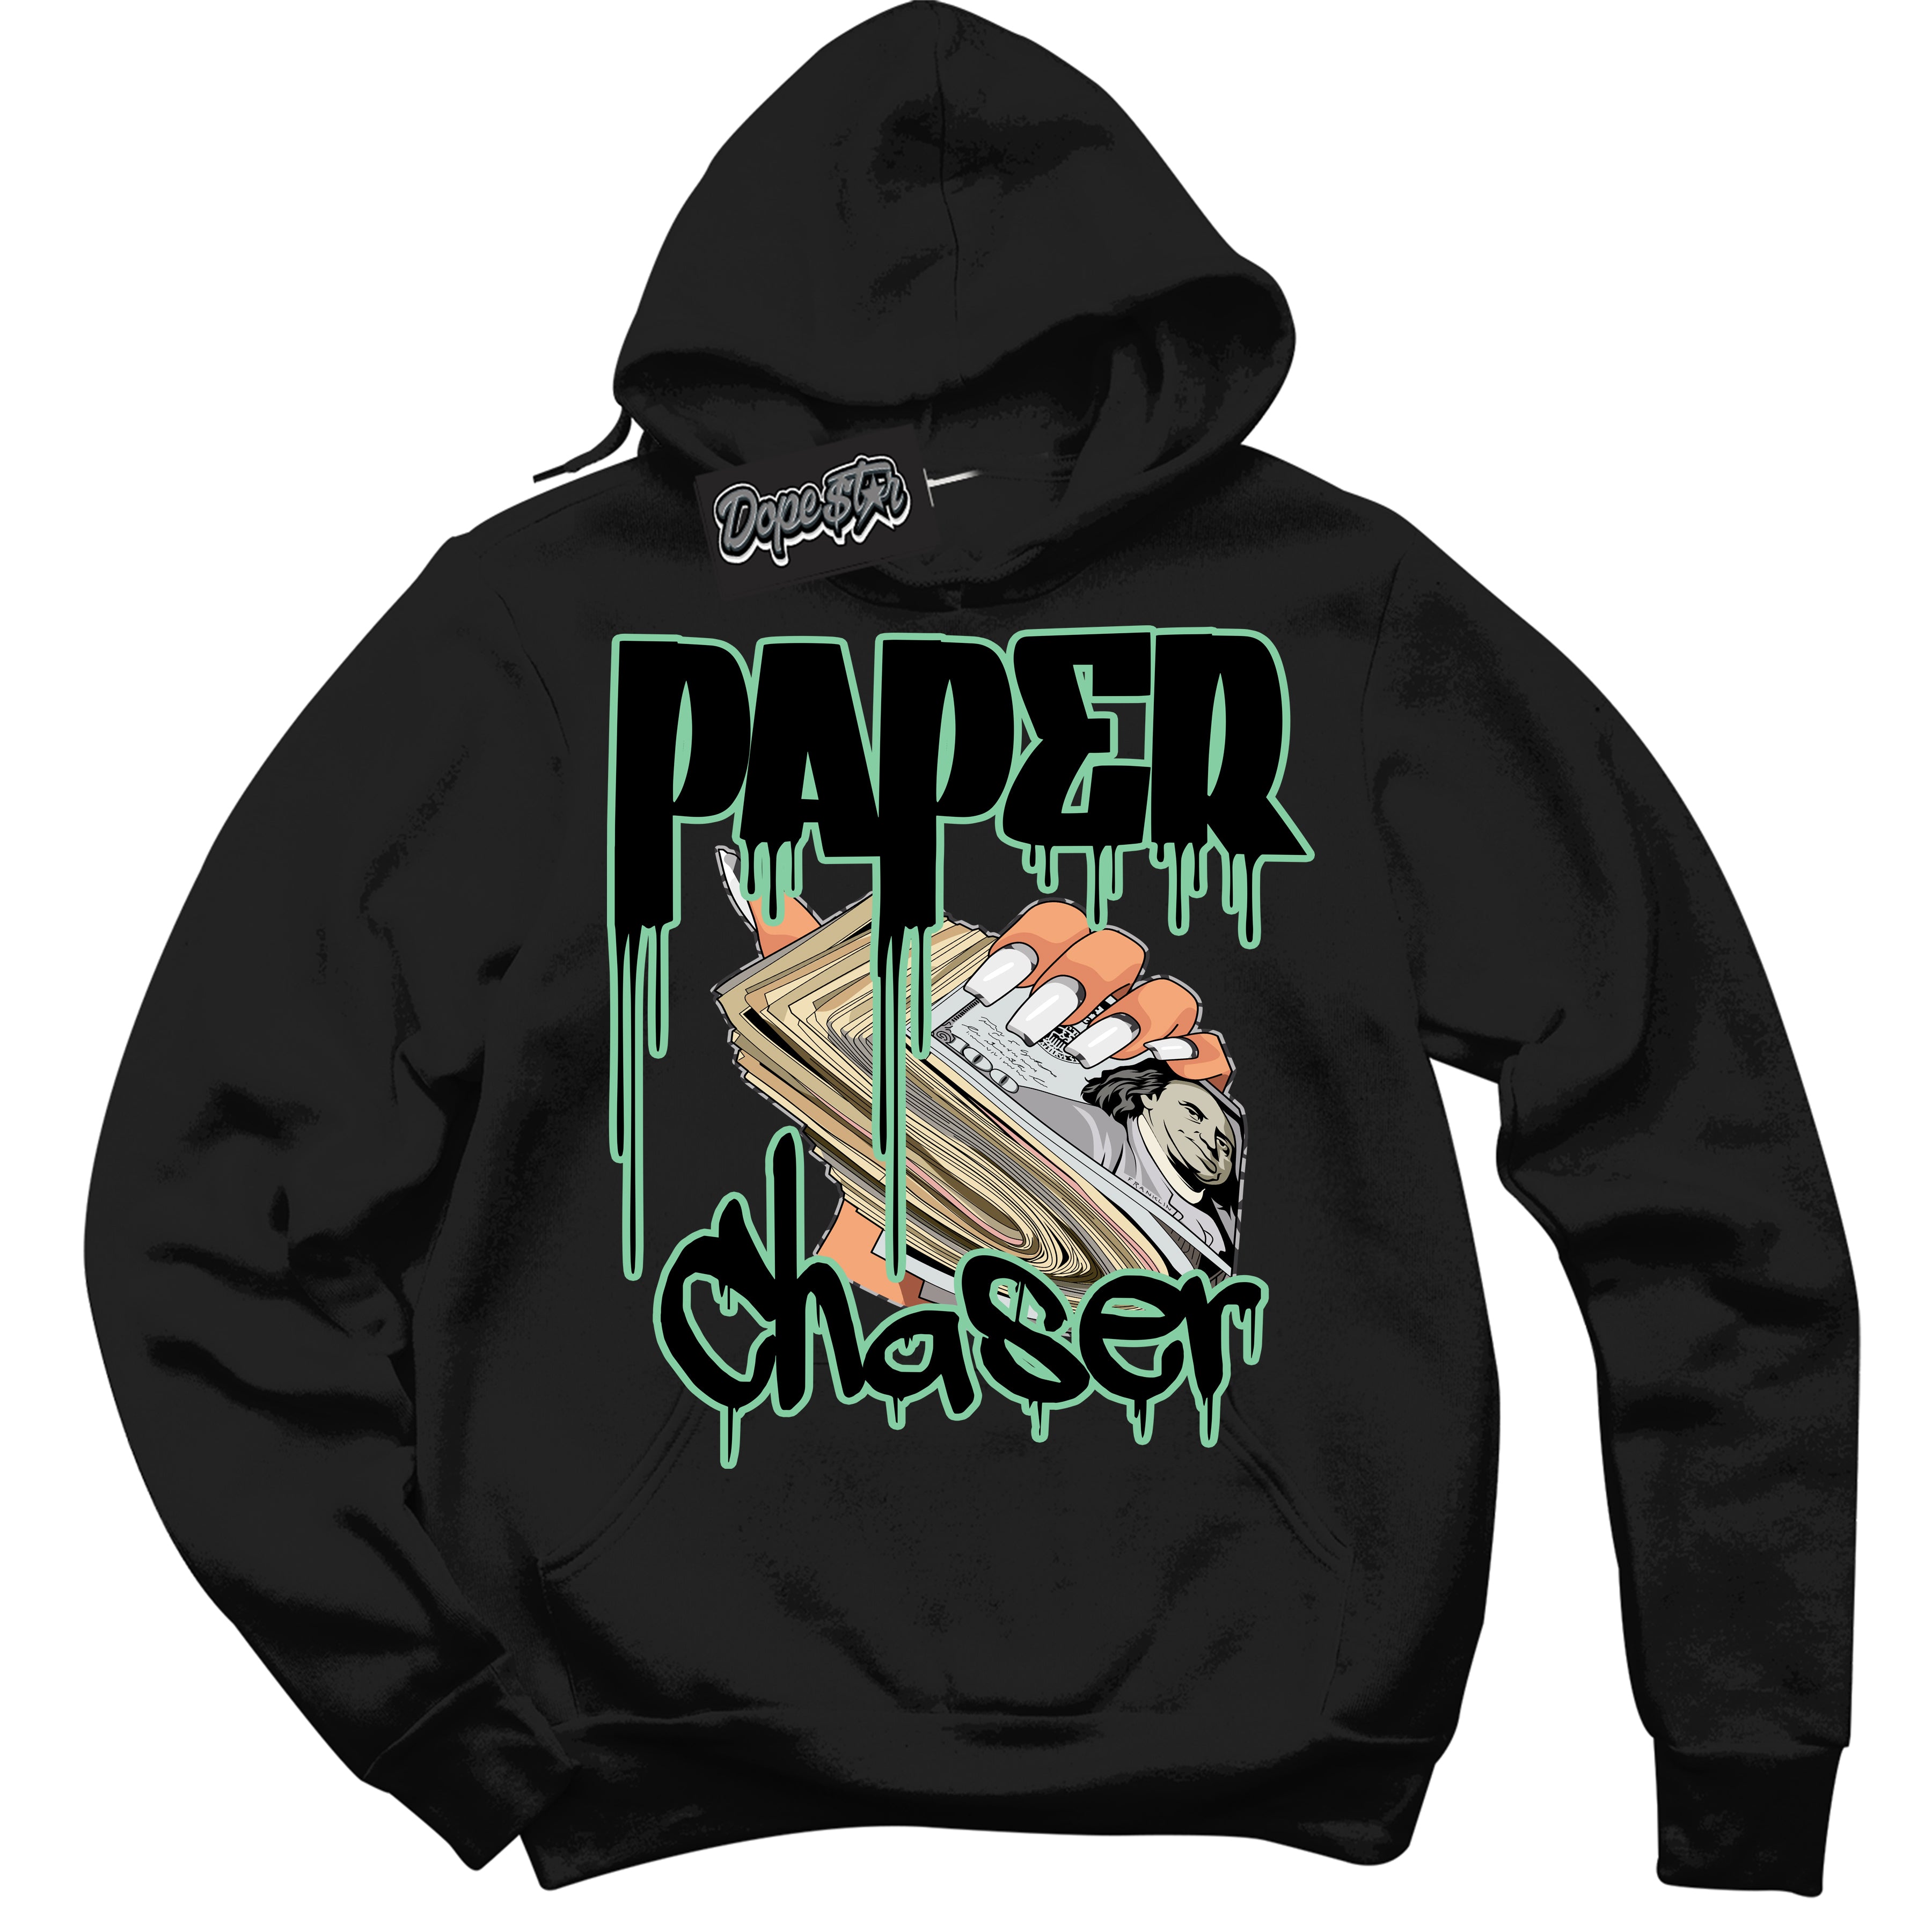 Cool Black Graphic DopeStar Hoodie with “ Paper Chaser “ print, that perfectly matches Green Glow 3S sneakers